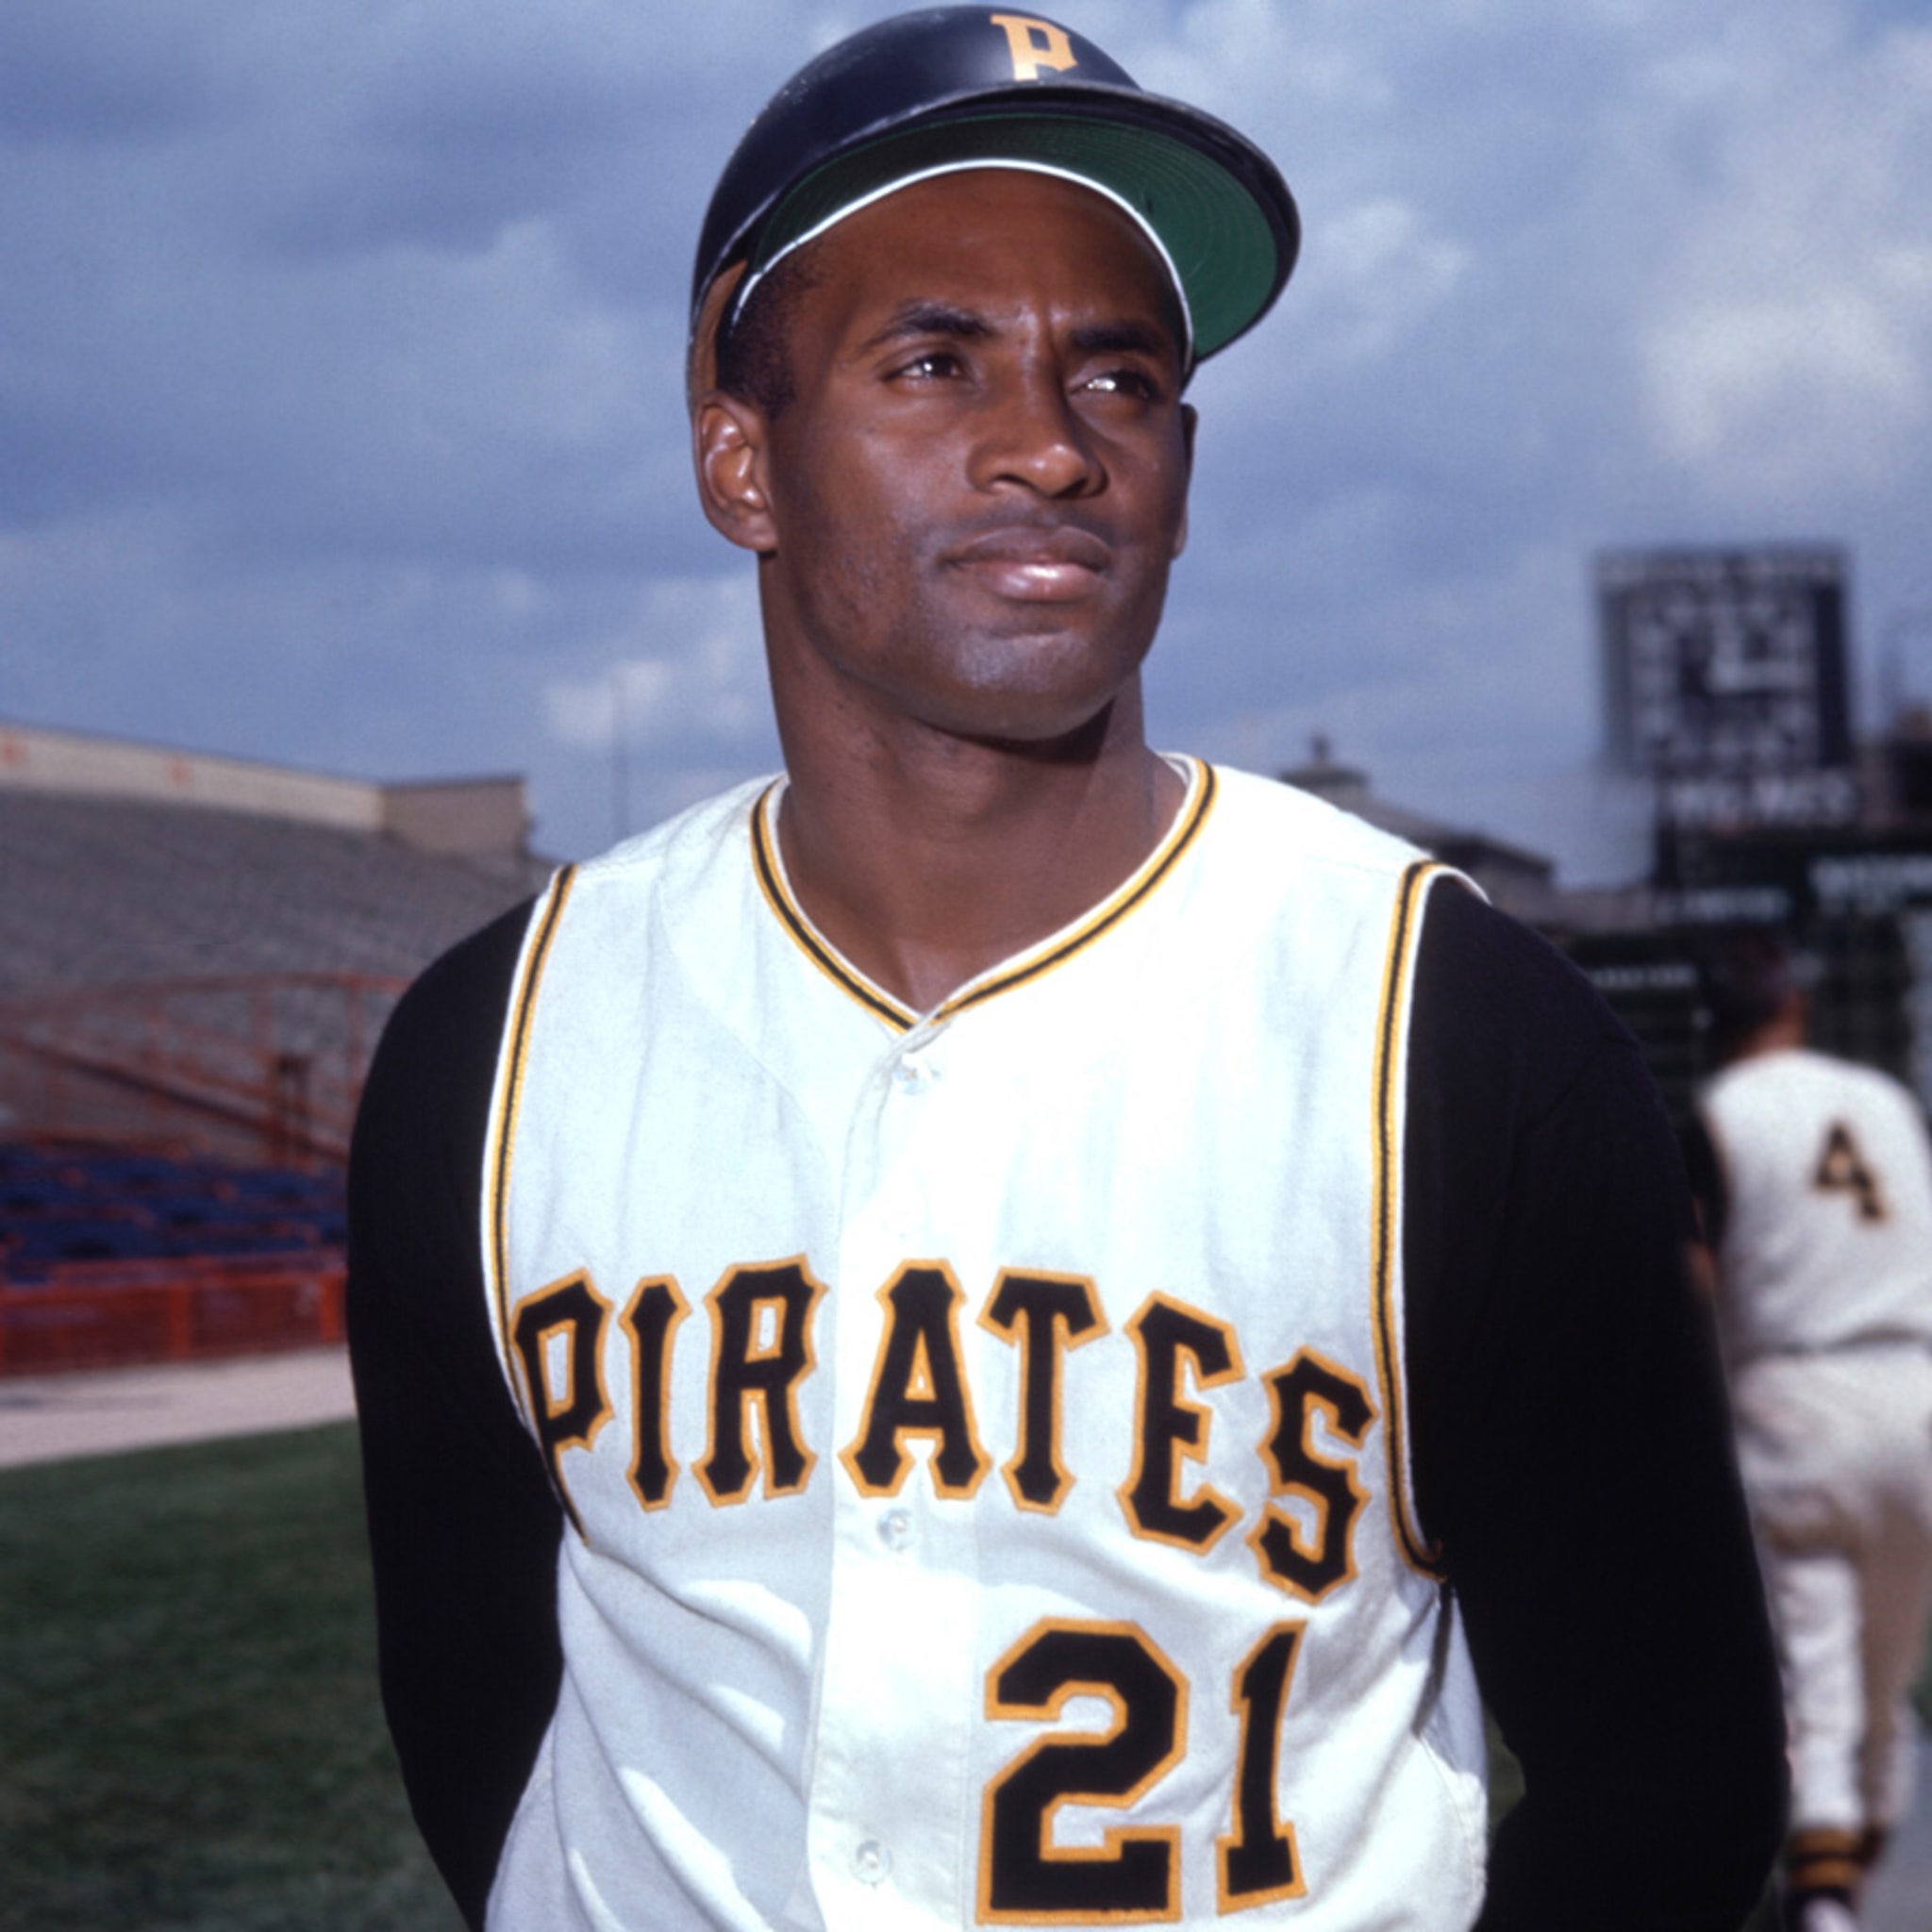 Roberto Clemente Day: Pirates and Mets wear 21